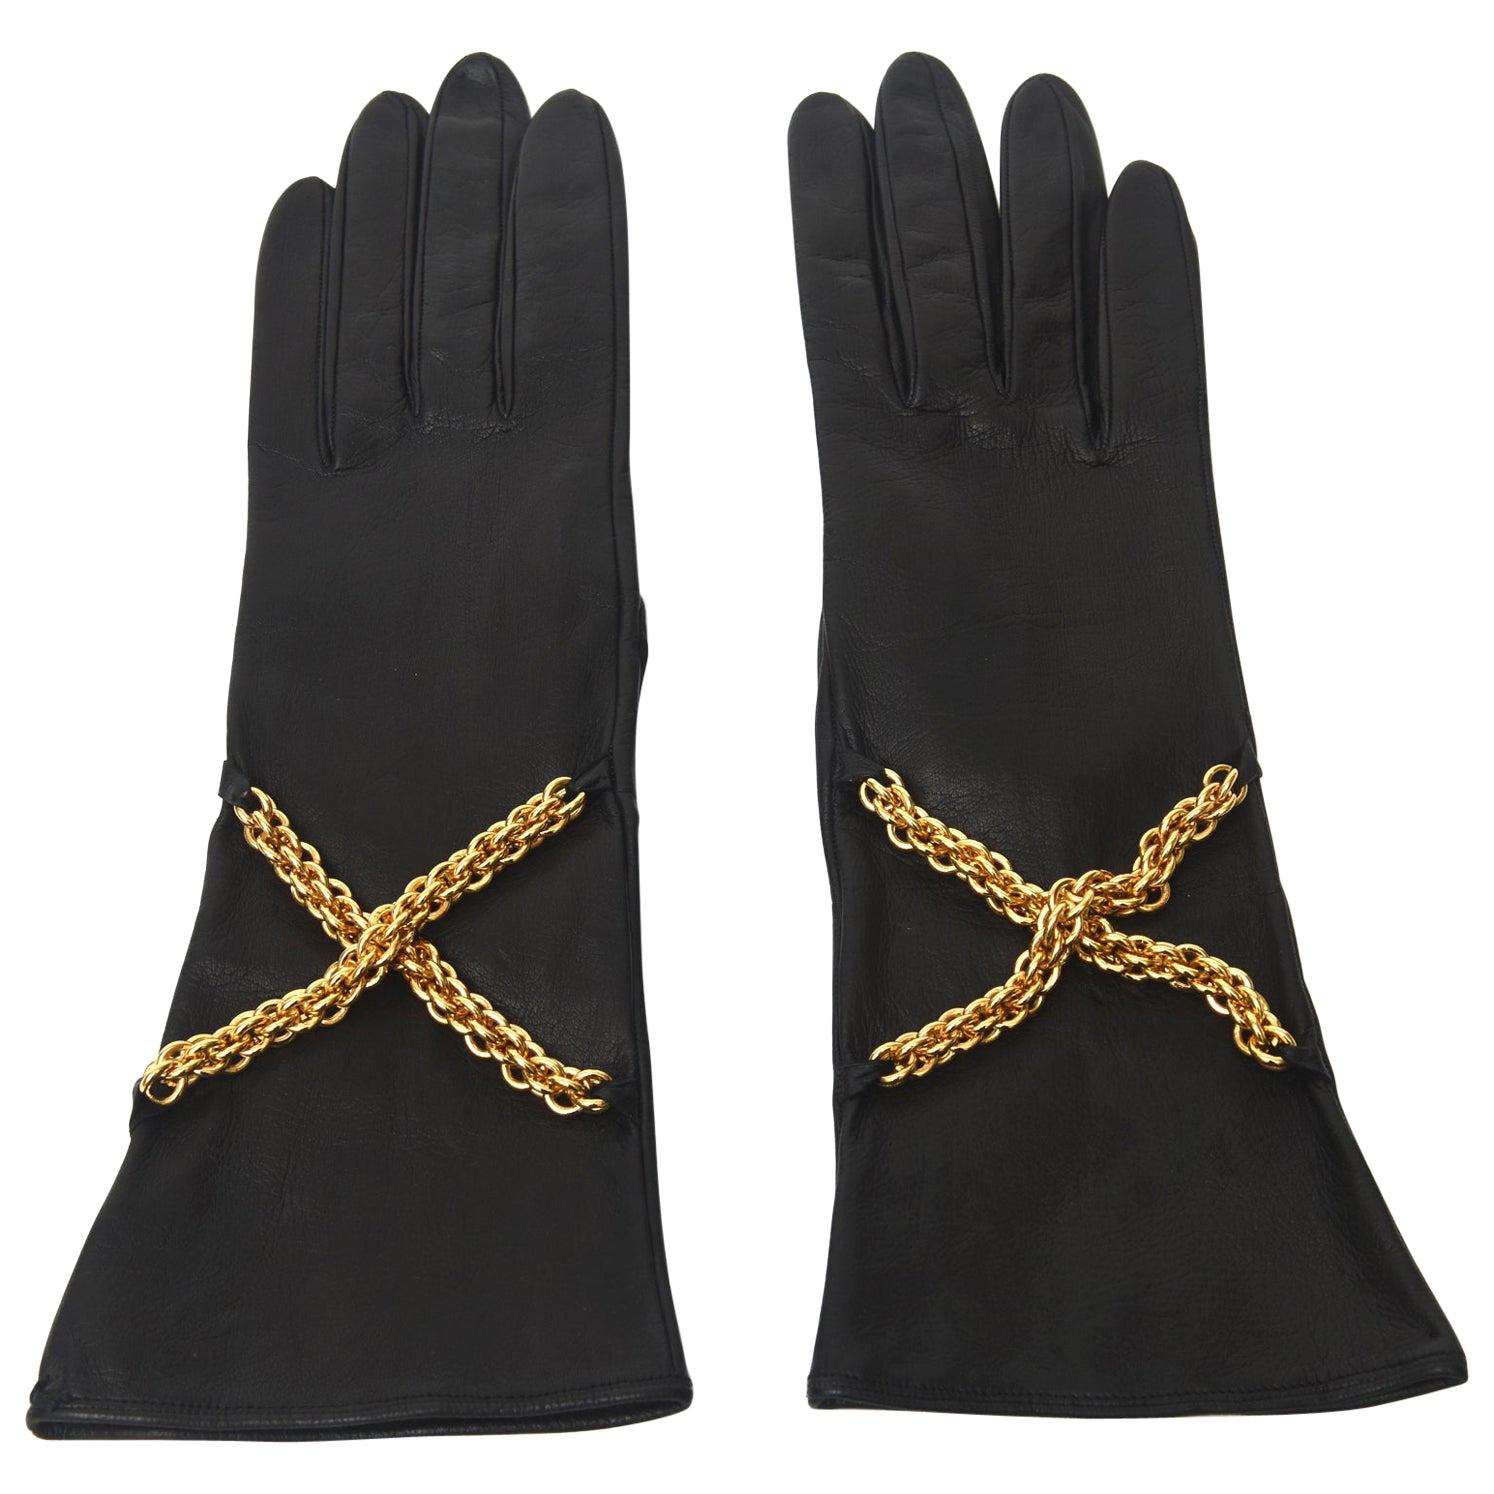  Paloma Picasso Back Leather and Brass Chain Gloves Pair Of